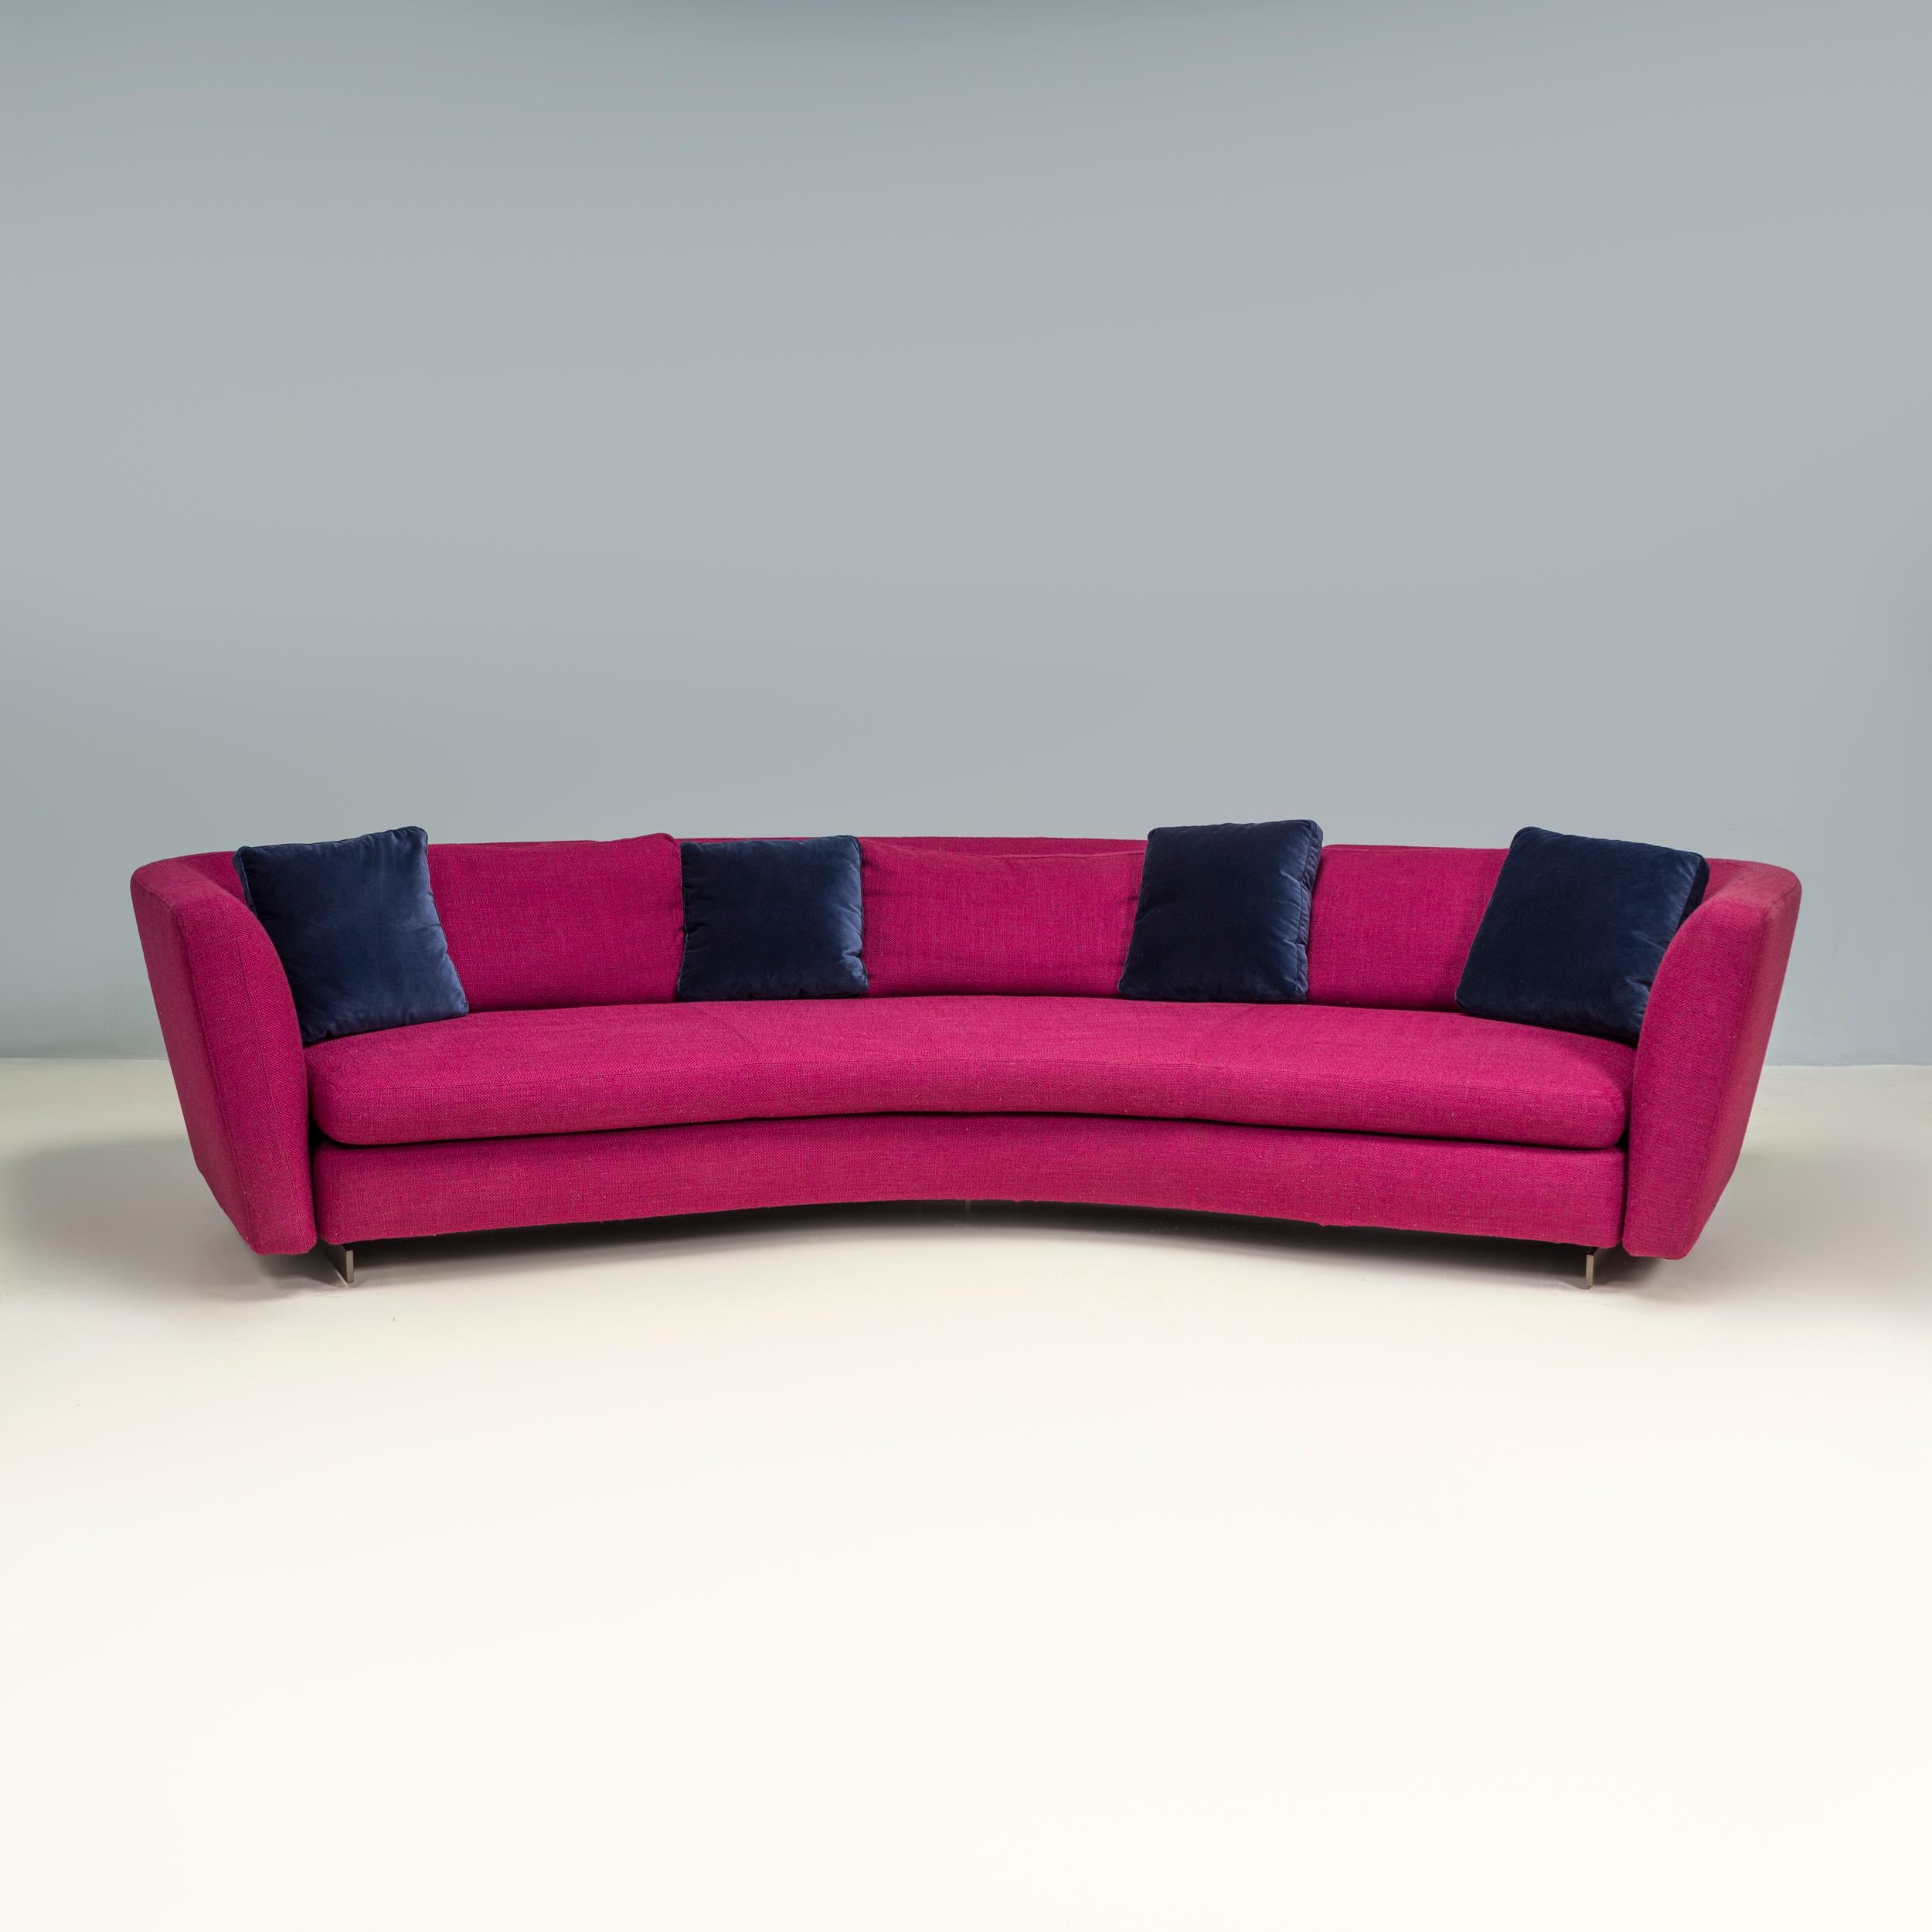 Originally designed by Roldolfo Dordoni in 2015 and manufactured by Minotti, the Seymour semi round low sofa is a fantastic example of modern Italian design. 

With a curvaceous silhouette, the sofa has a semi-circular seat with a curved tuxedo